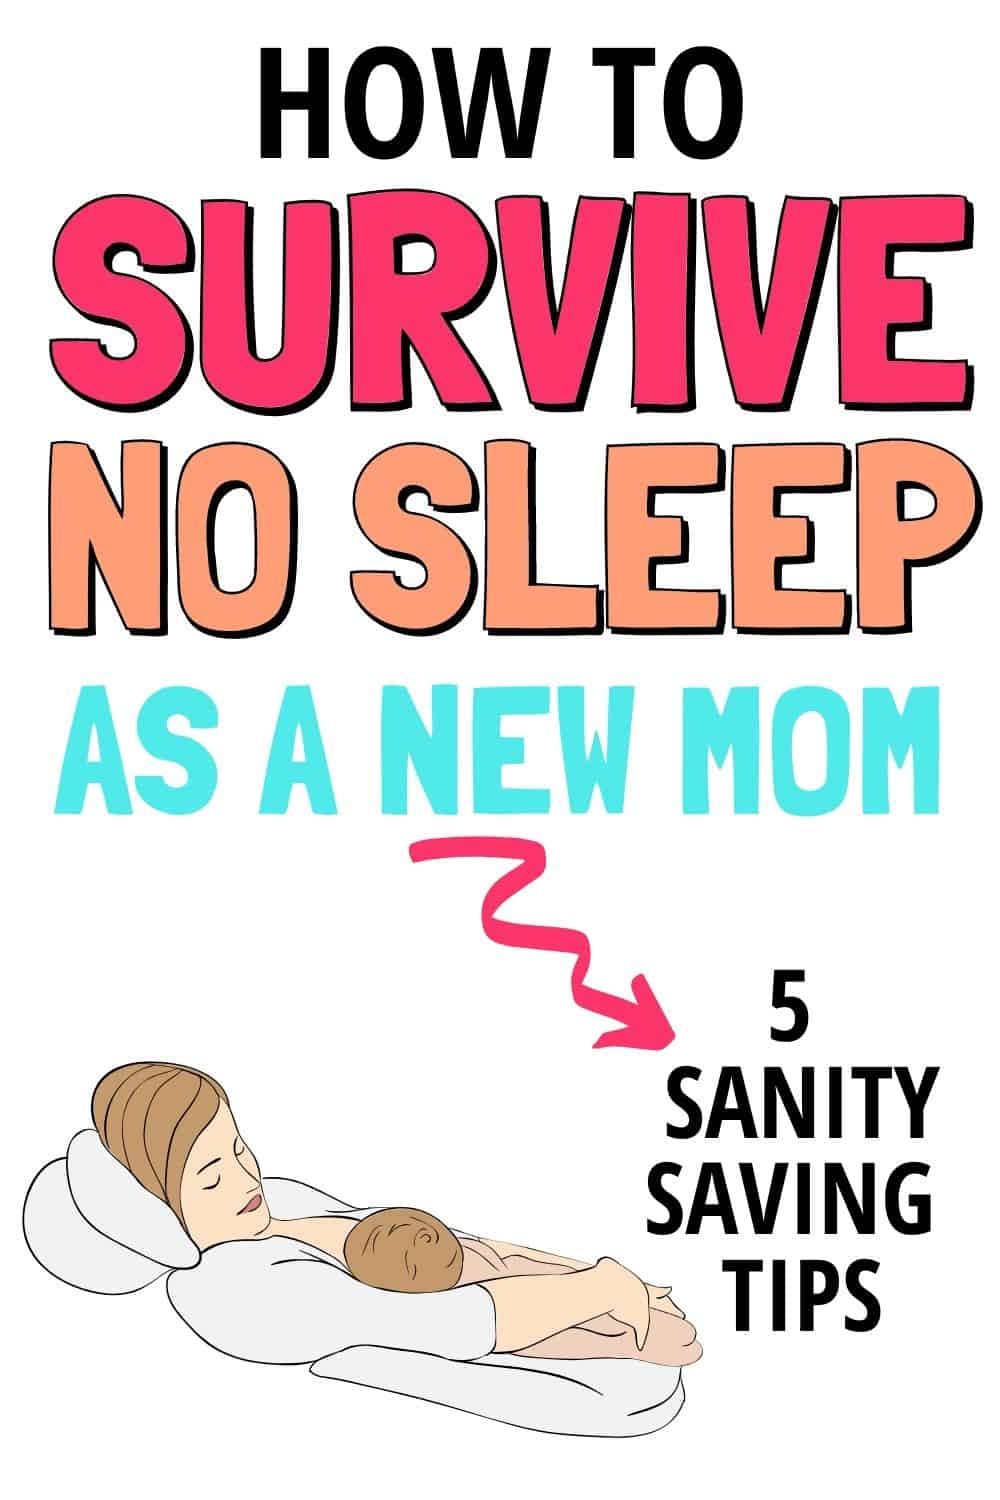 How to survive on no sleep as a new mom